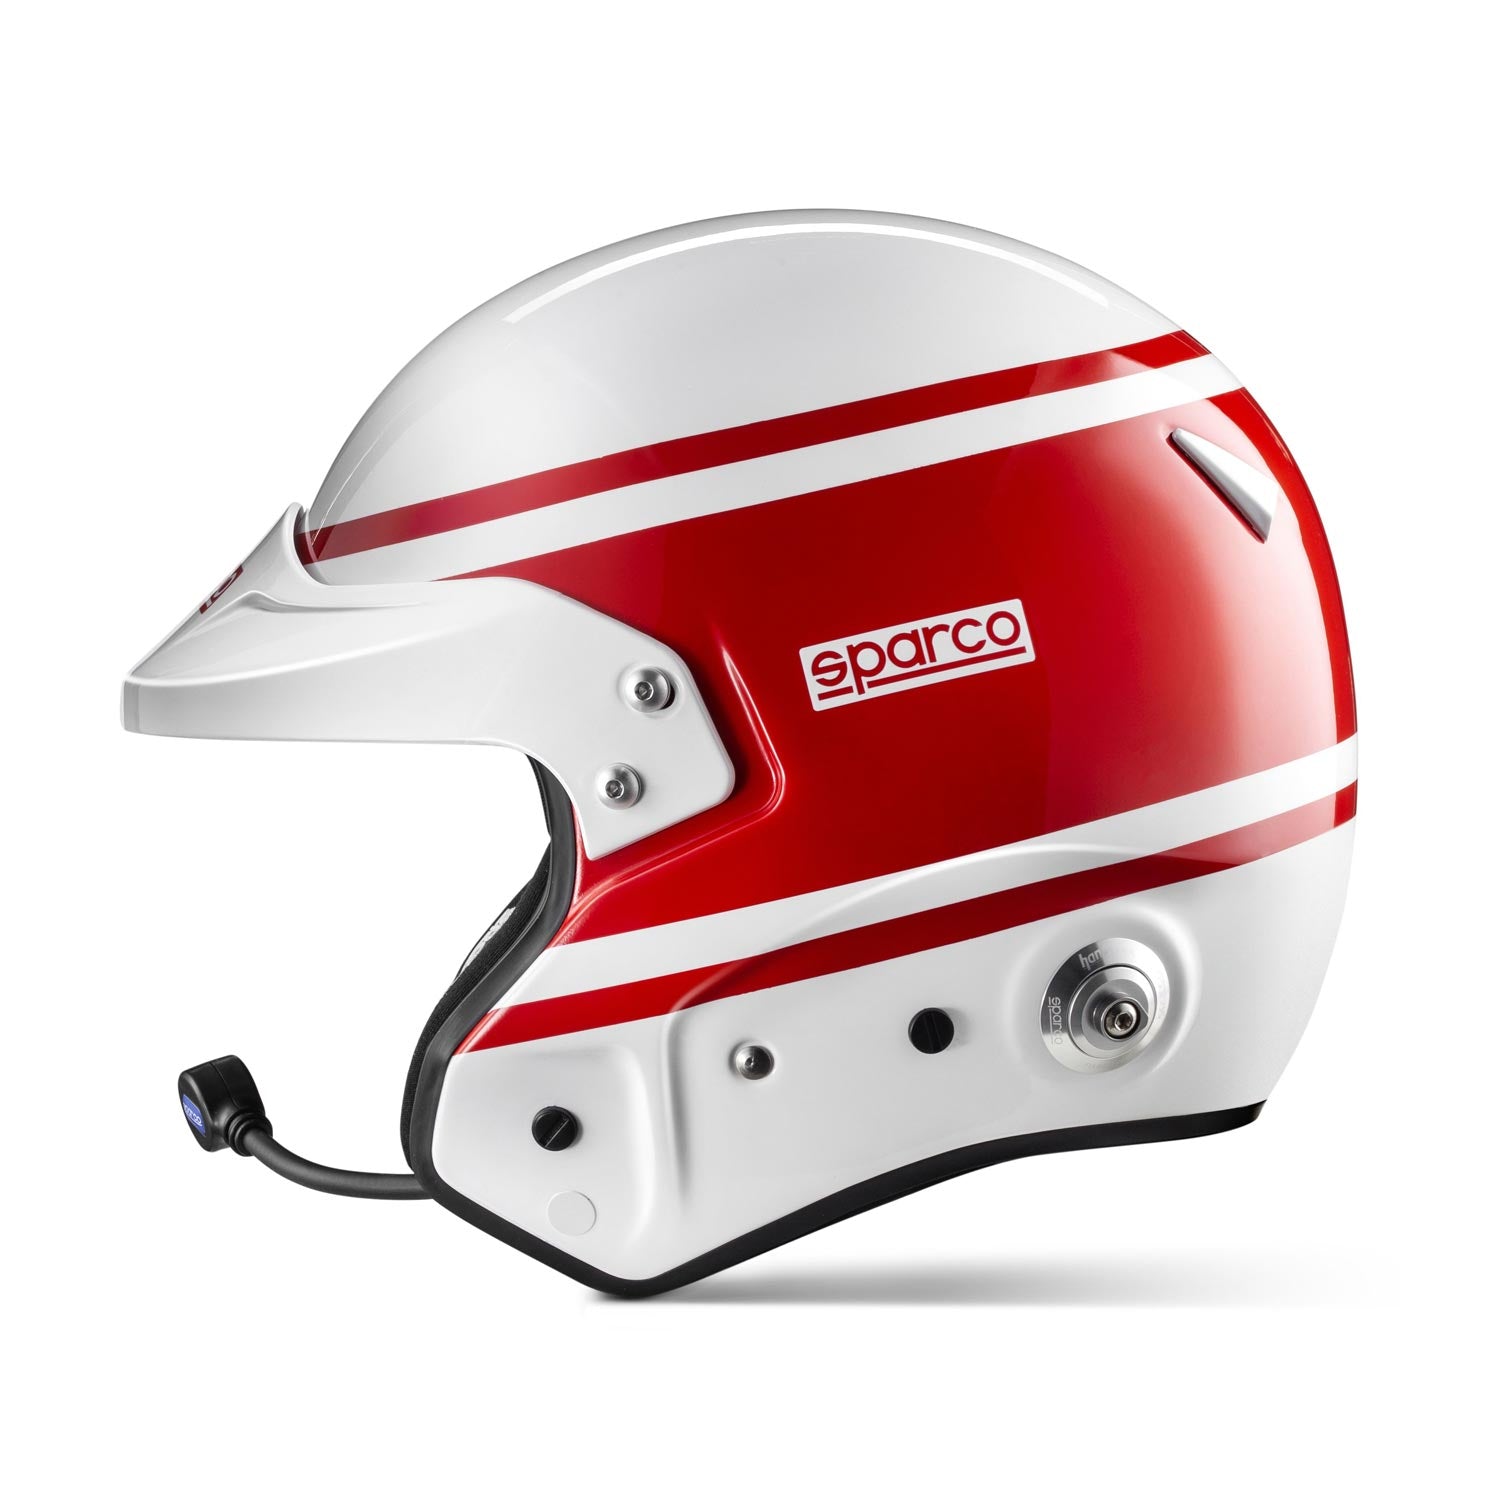 SPARCO 003369RS4L RJ-i 1977 Racing helmet open-face, FIA/SNELL SA2020, red/white, size L (60) Photo-1 